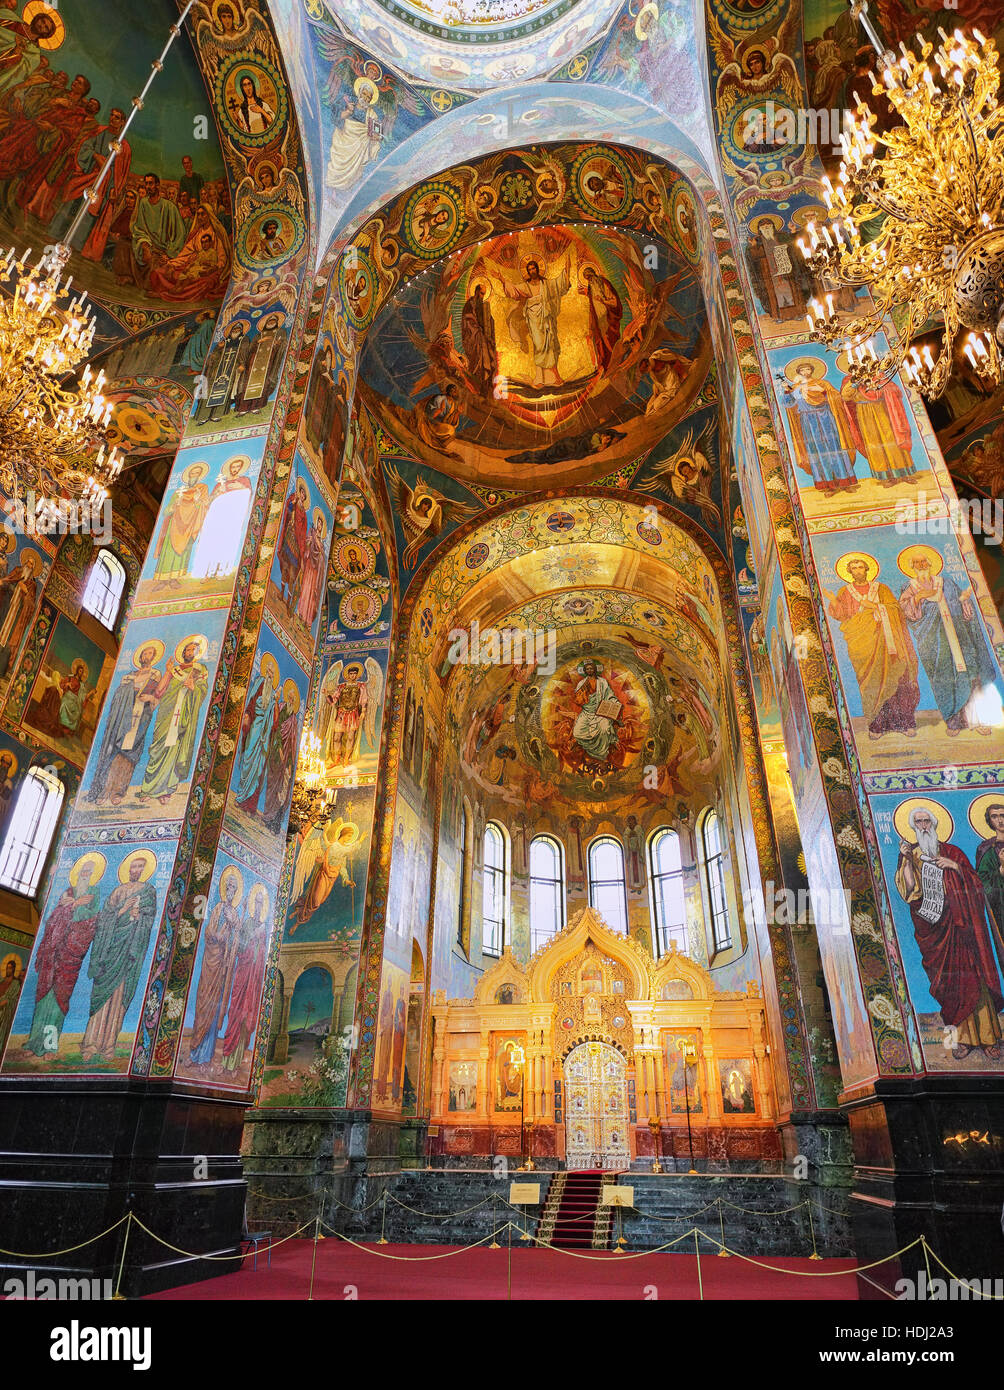 ST. PETERSBURG, RUSSIA FEDERATION - JUNE 29:Interior of Church Savior on  Spilled Blood . Picture takes in Saint-Petersburg, inside Church Savior on  Sp Stock Photo - Alamy